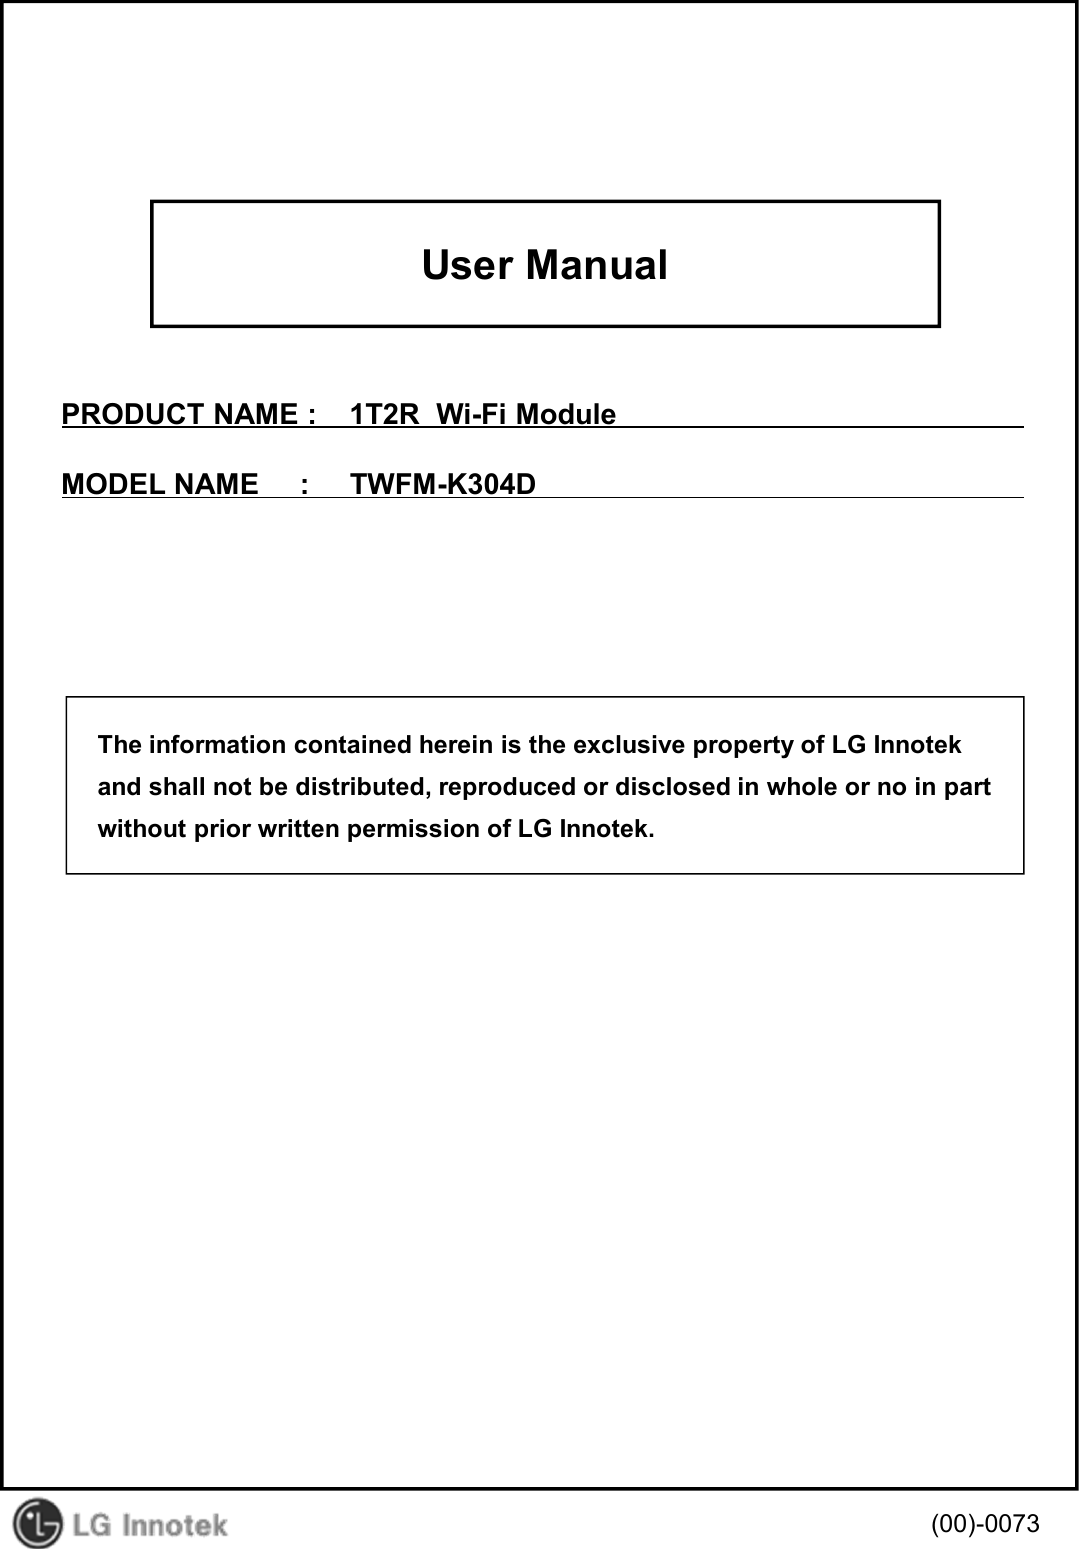 User ManualPRODUCT NAME :    1T2R  Wi-Fi ModuleMODEL NAME     :     TWFM-K304D(00)-0073The information contained herein is the exclusive property of LG Innotekand shall not be distributed, reproduced or disclosed in whole or no in partwithout prior written permission of LG Innotek.